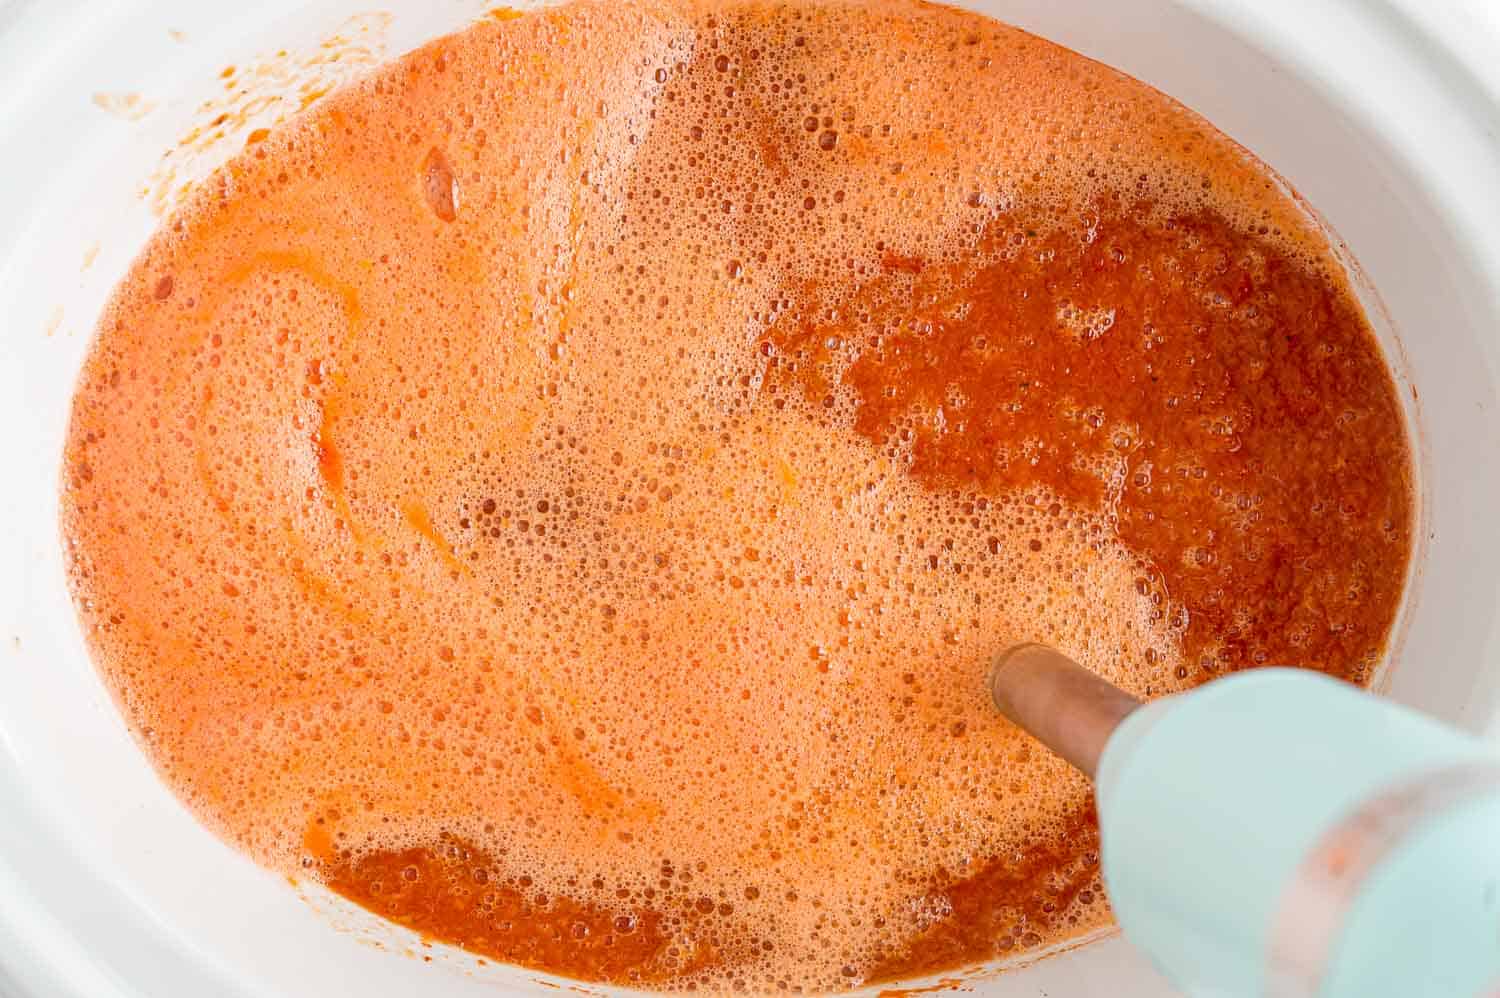 Tomato soup being blended with an immersion blender.